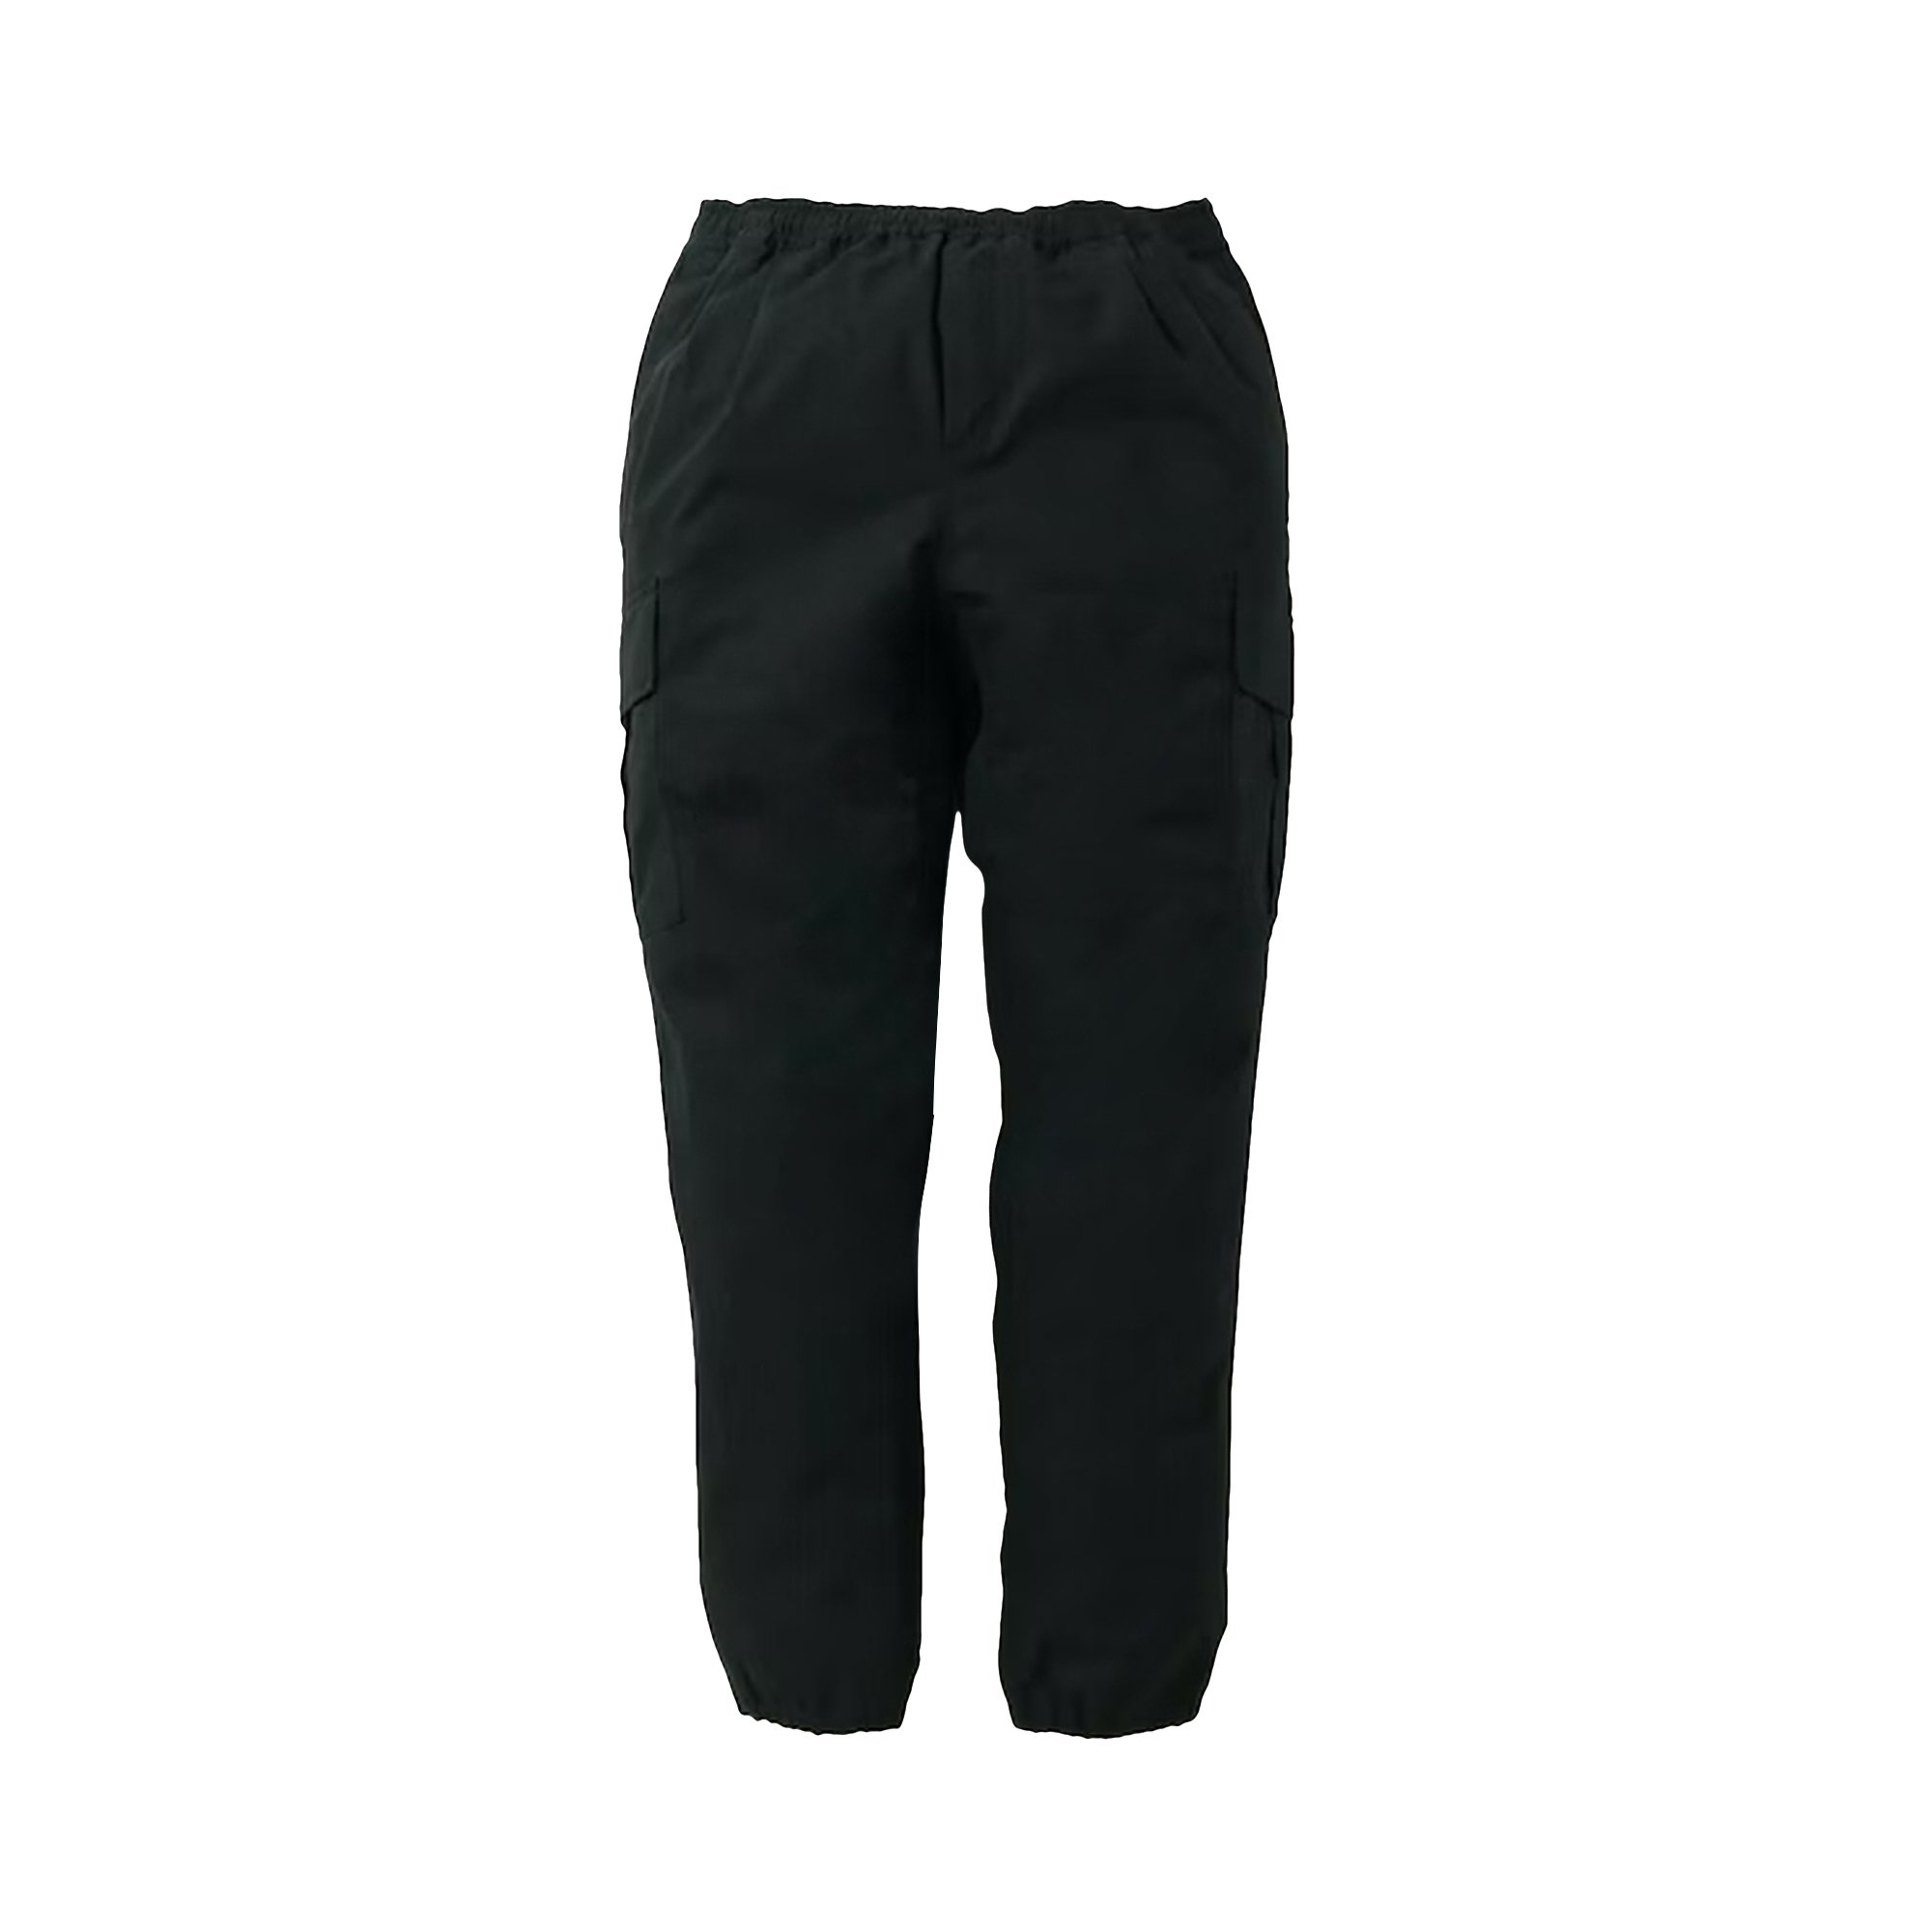 Easy pants military. Sweatpants like and rugged military look